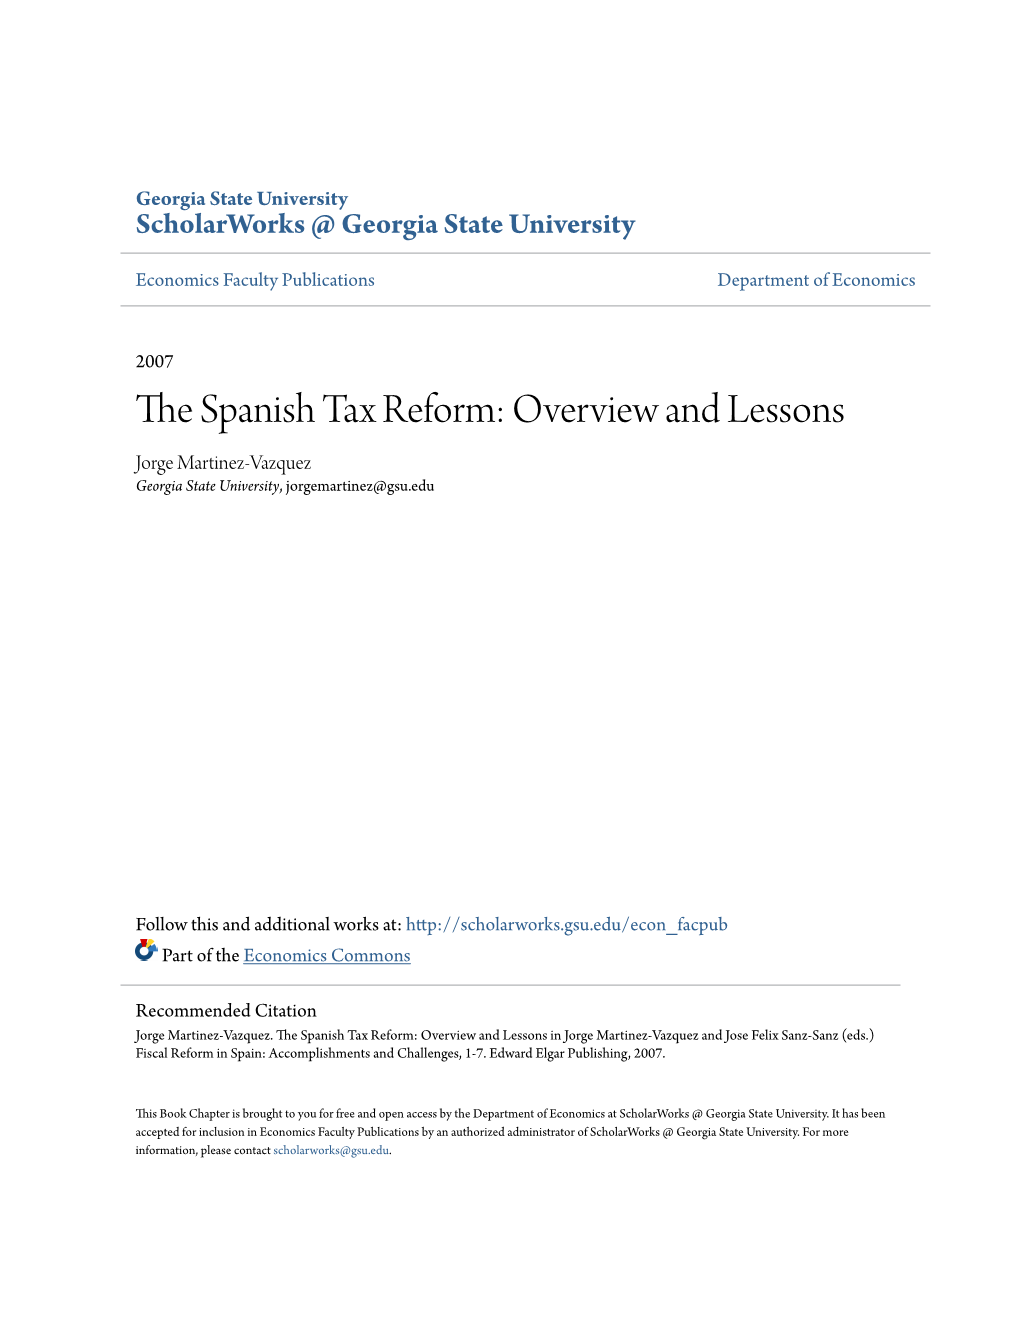 The Spanish Tax Reform: Overview and Lessons